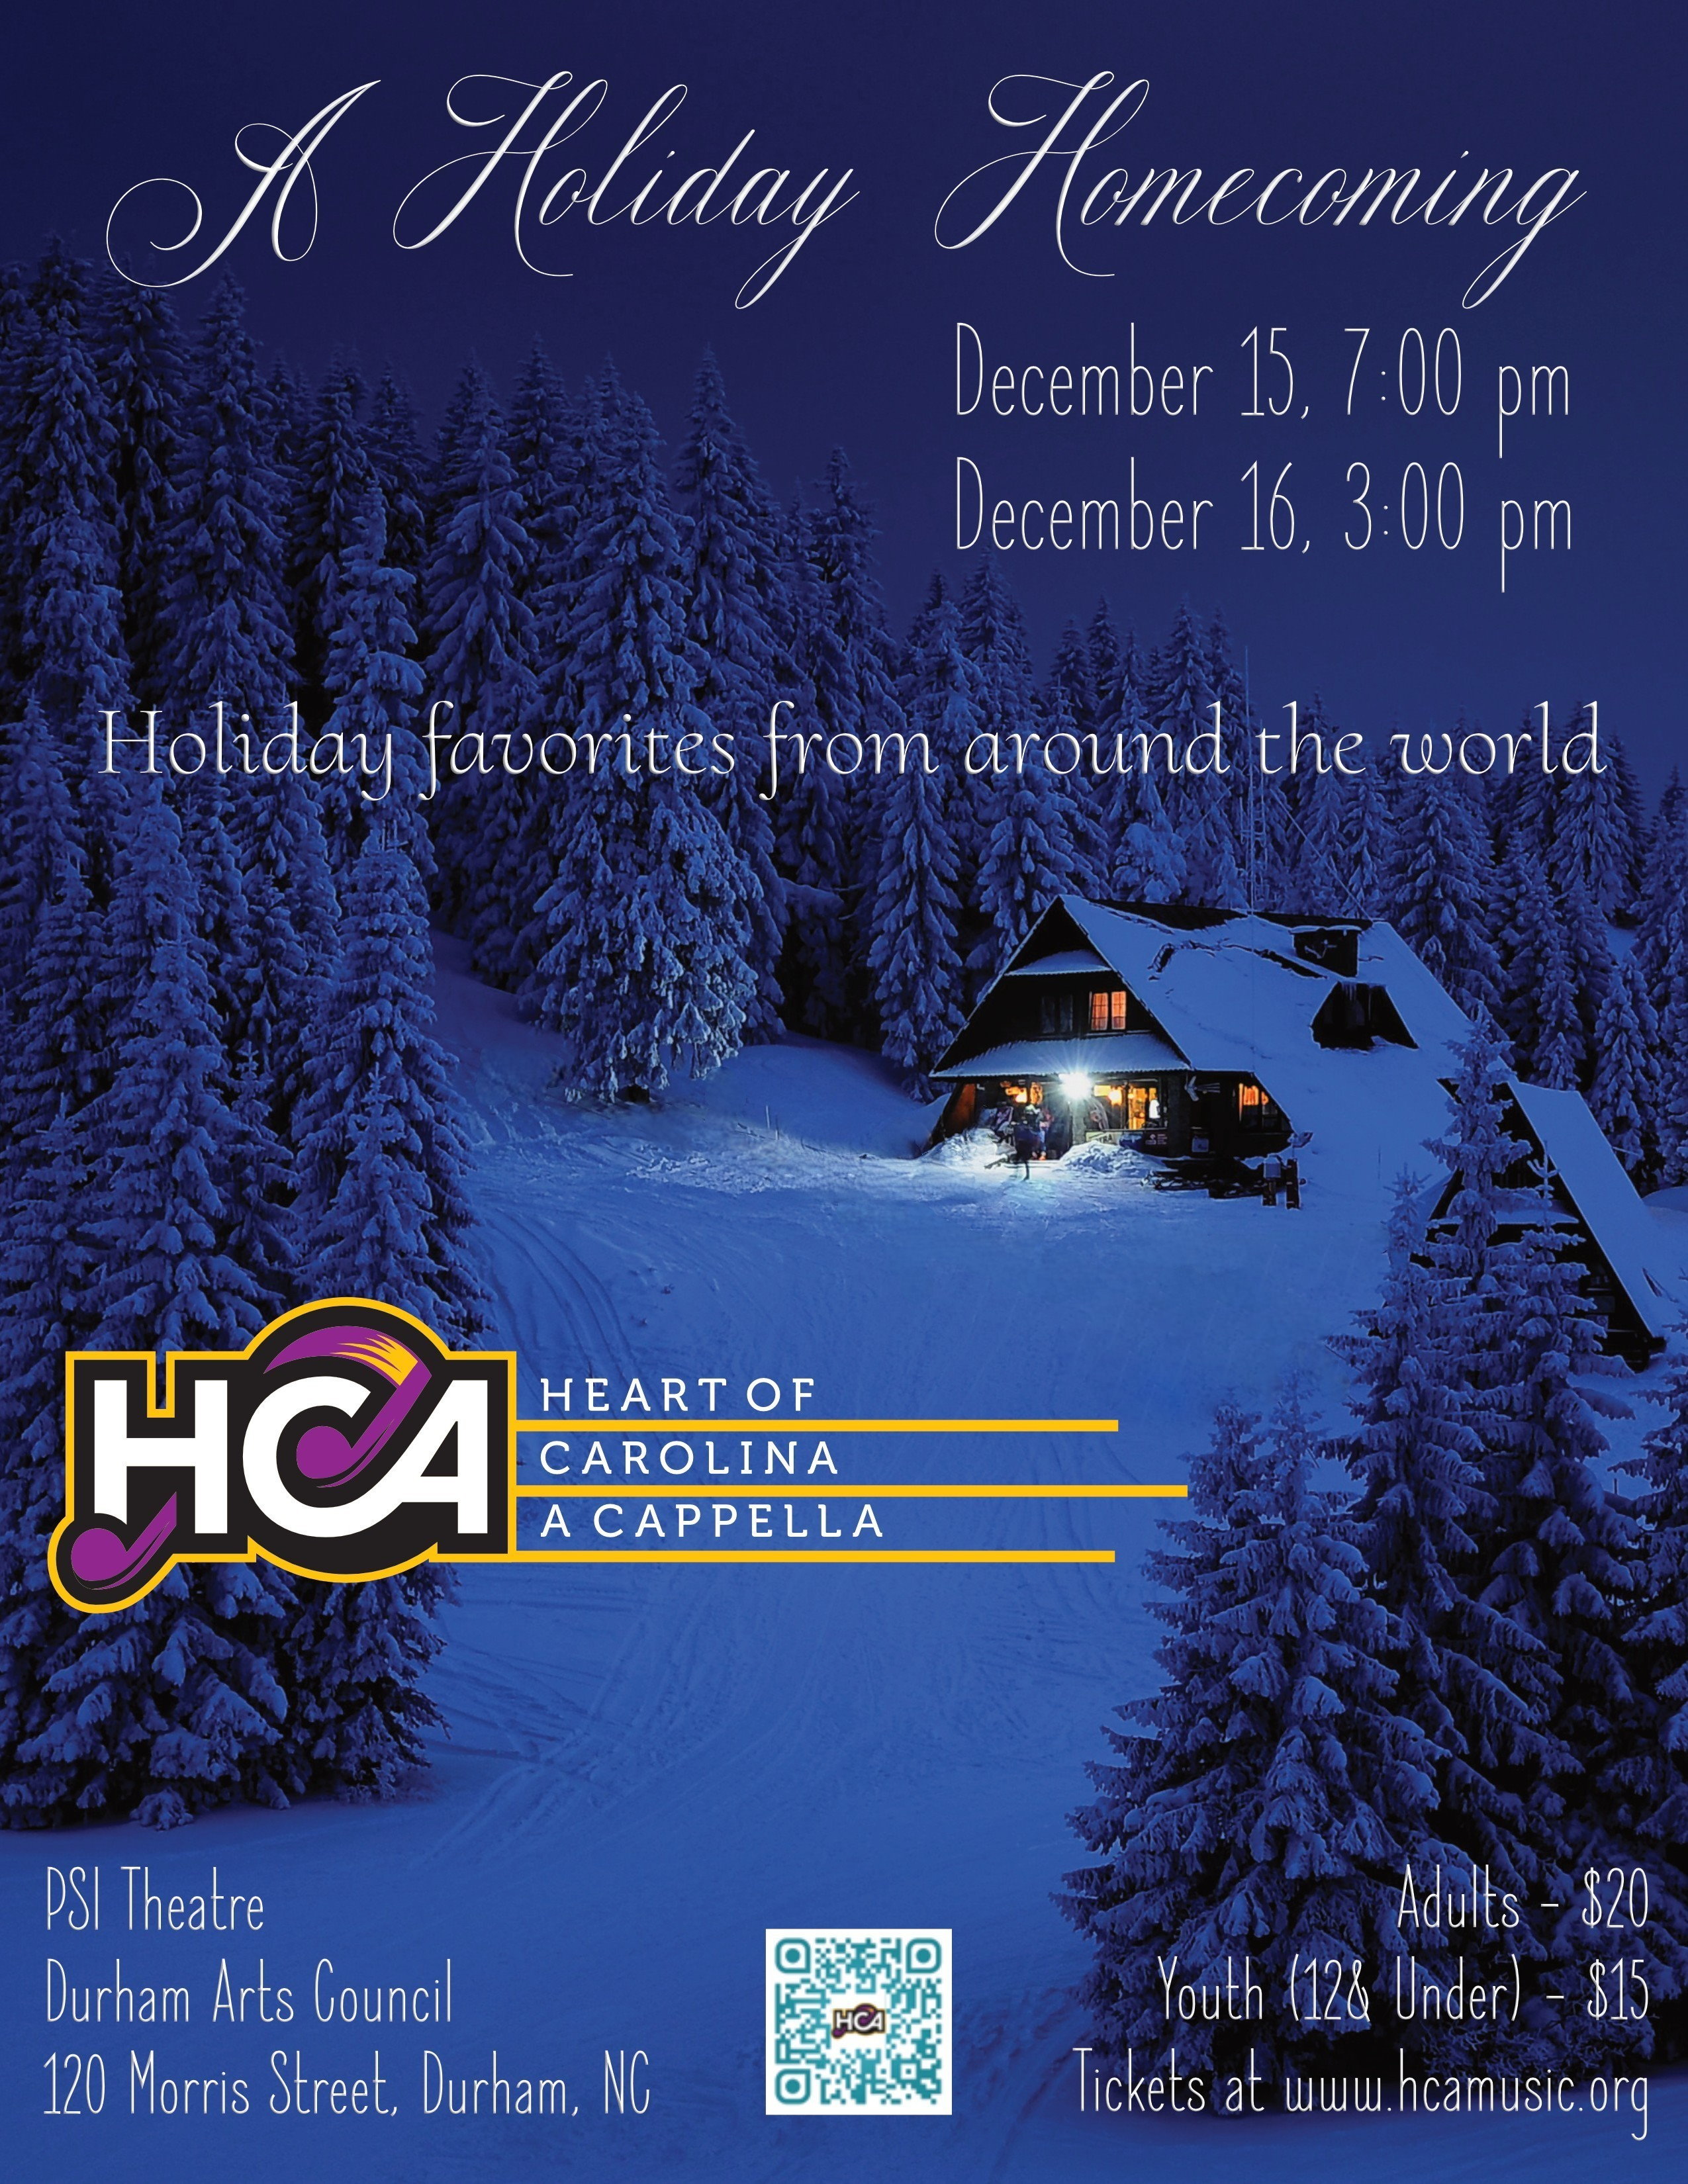 The World for Christmas with Heart of Carolina A Cappella.  Friday, December 15 at 7pm and Saturday, December 16 at 3pm in the PSI Theater at Durham Arts Council, 120 Morris Street, Durham. Tickets $15 for children, $20 for adults.  Tickets available at the door.